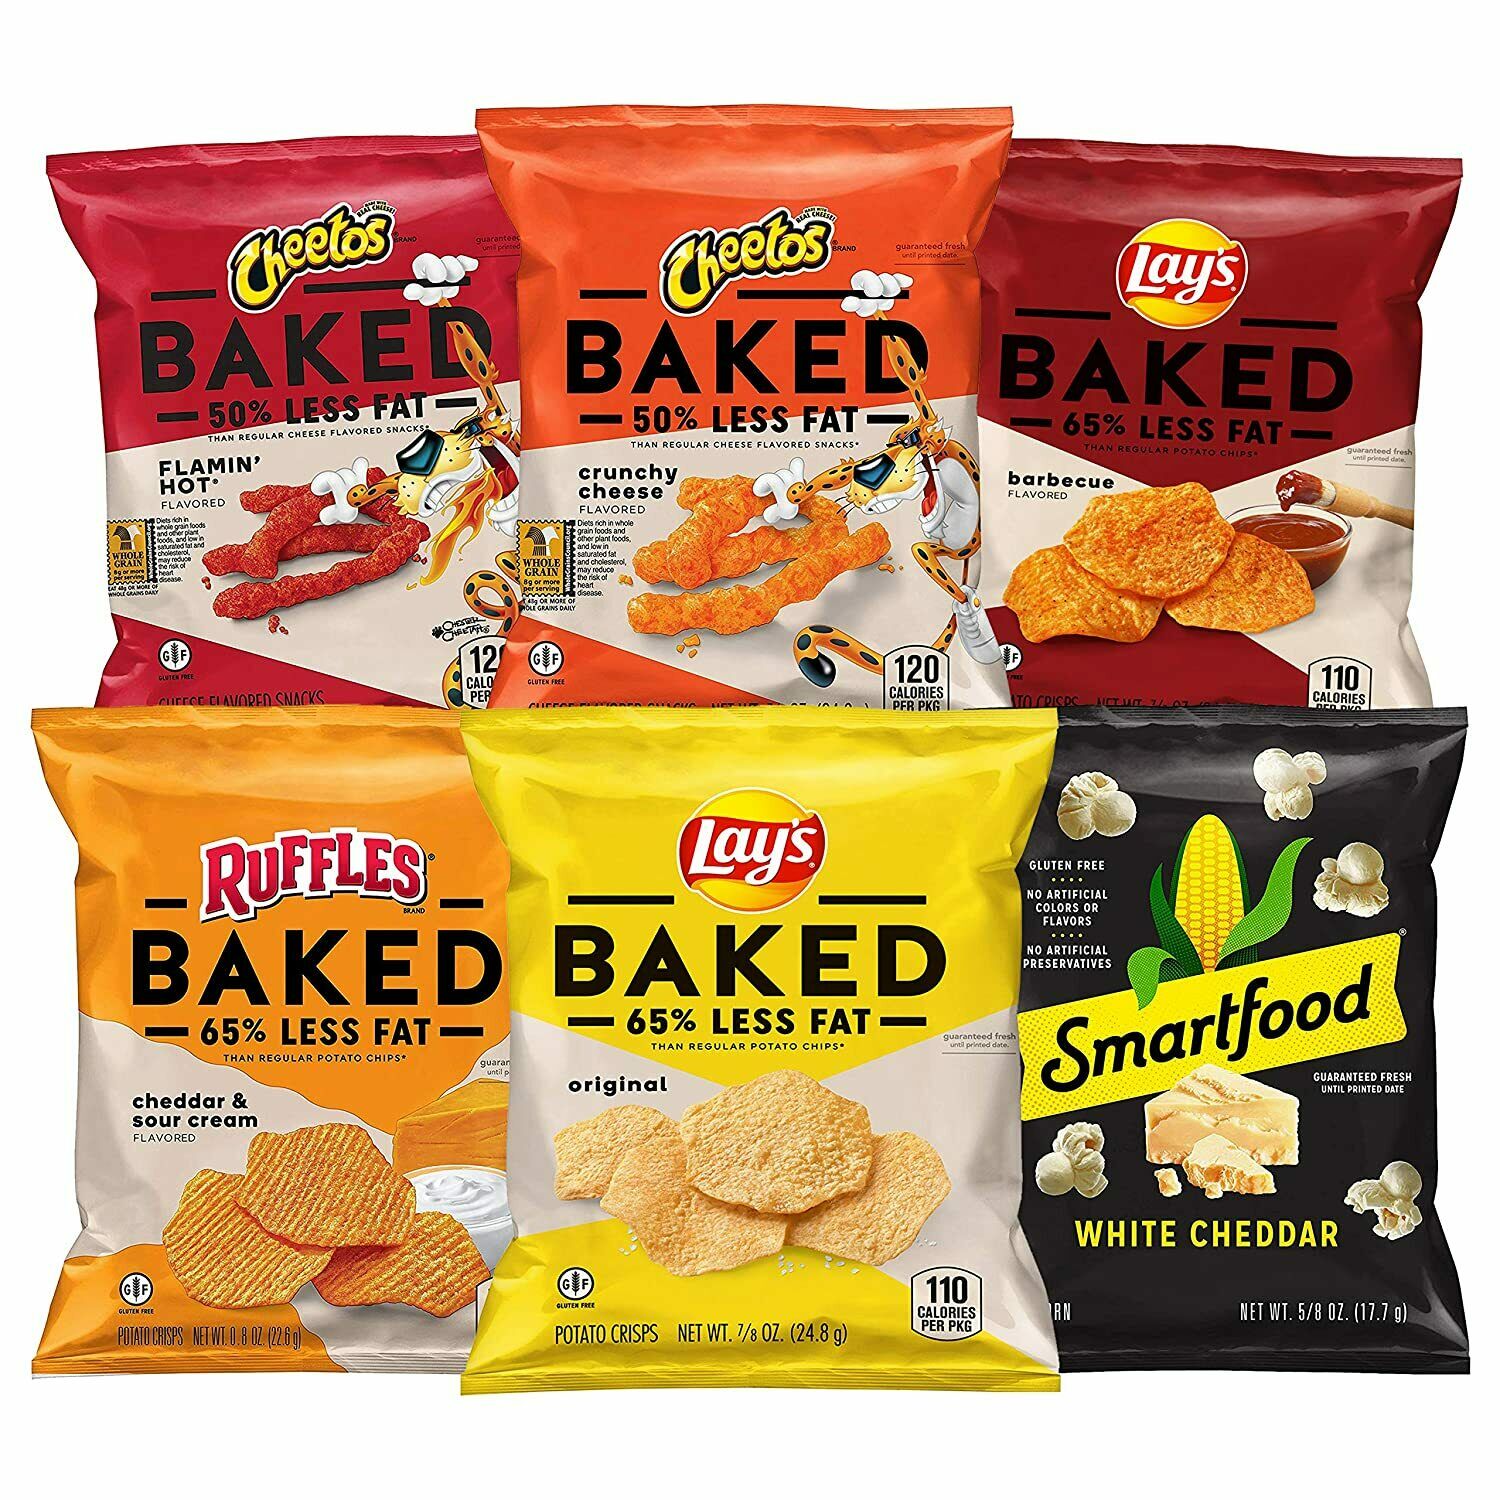 Frito-Lay Baked & Popped Mix Variety Pack, 40 Count